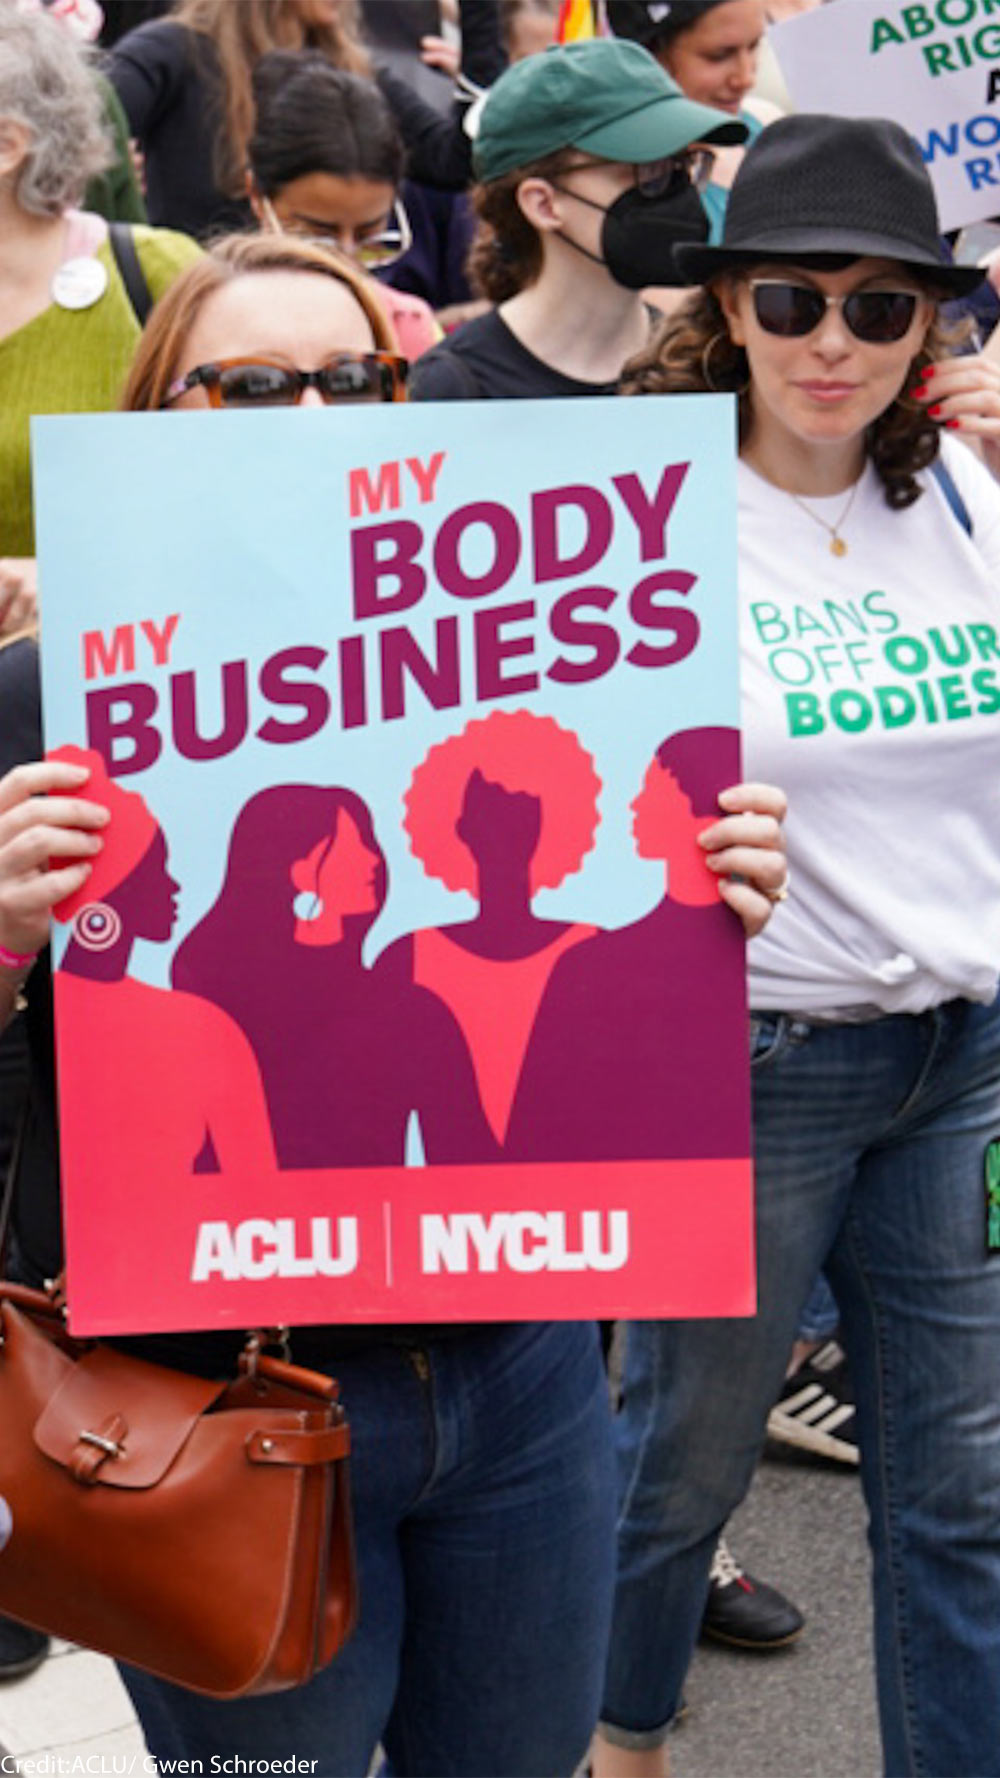 ACLU supporters marching at a reproductive rights rally.